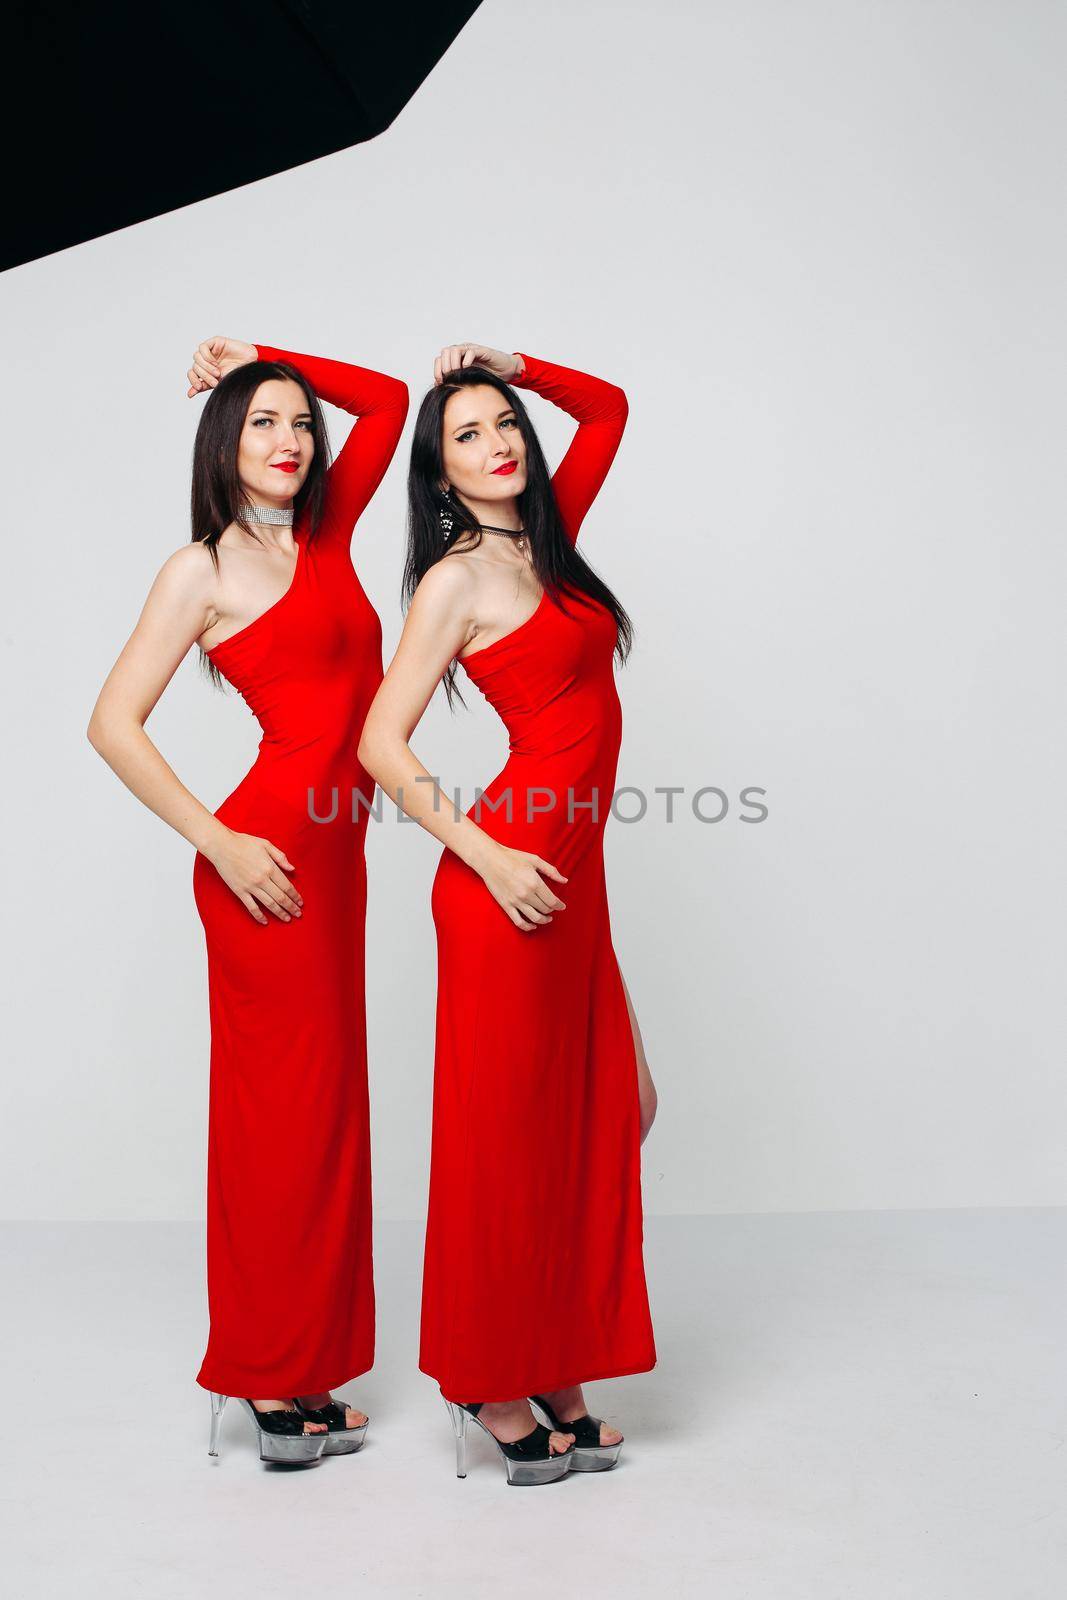 Two sexy sisters twins in red dresses. by StudioLucky